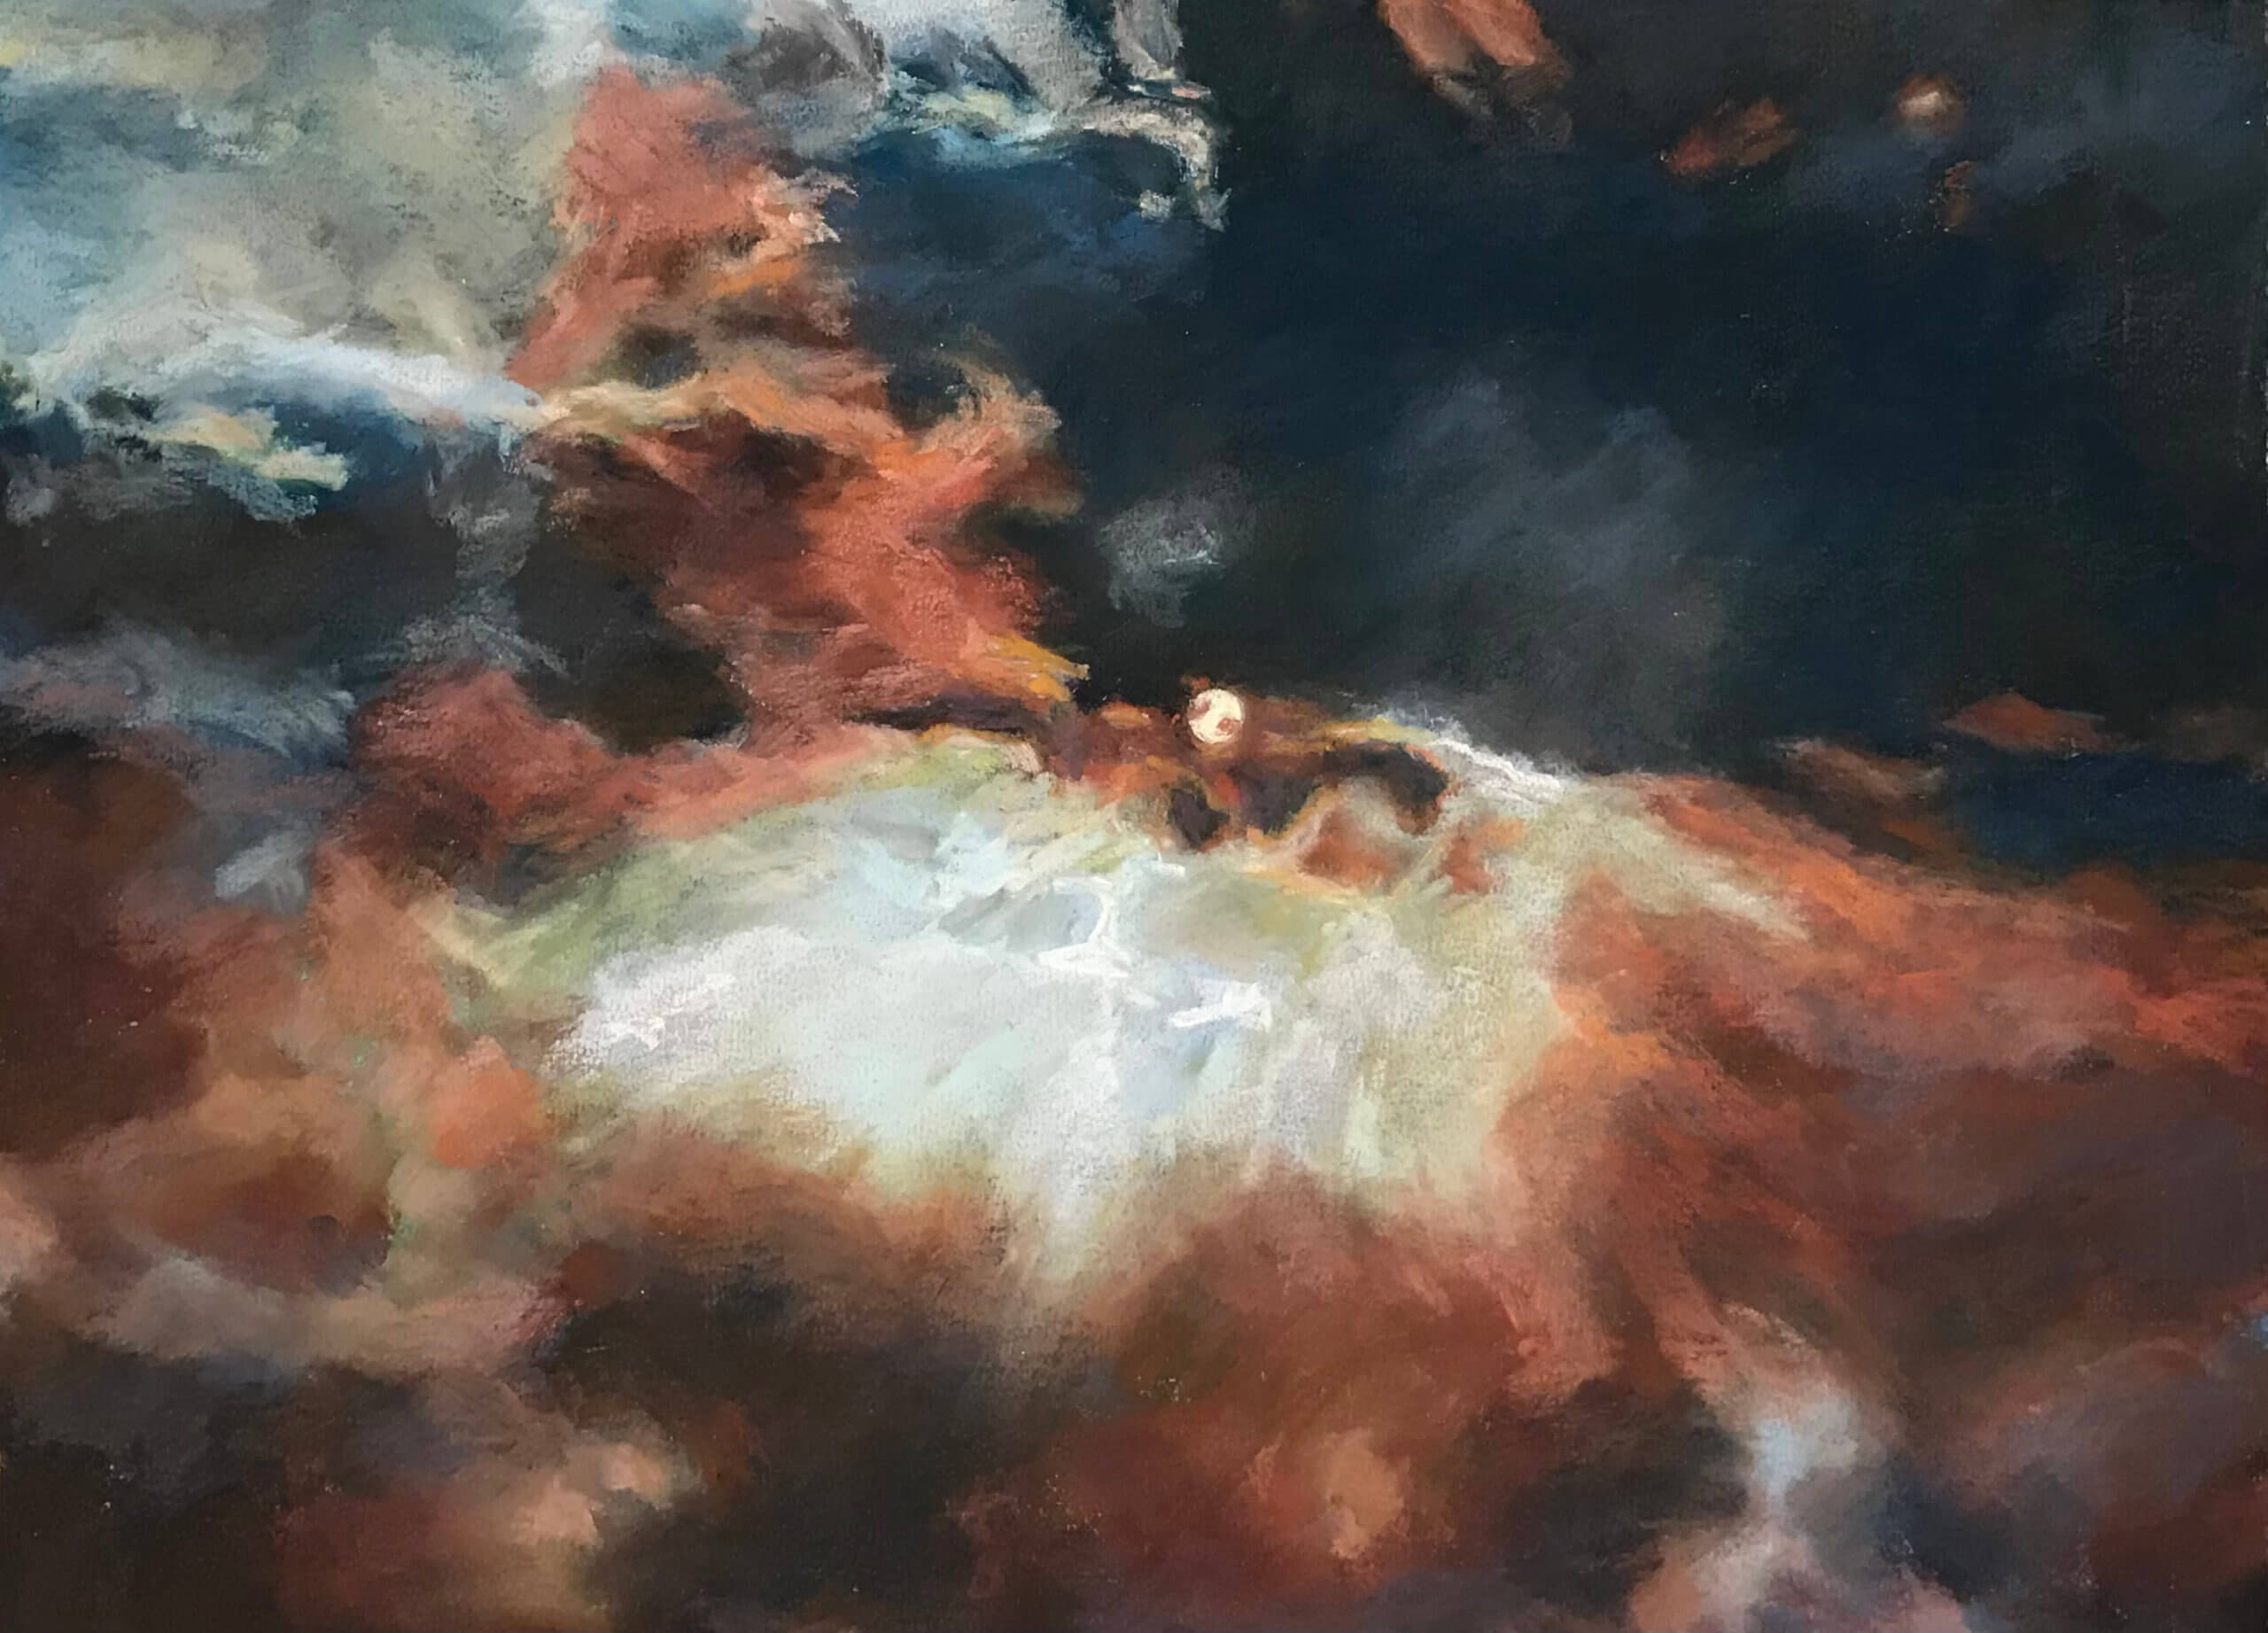 Pastel painting of dramatic storm clouds in off-white, russet-red and dark blue. The sun disc peeks through at the center.